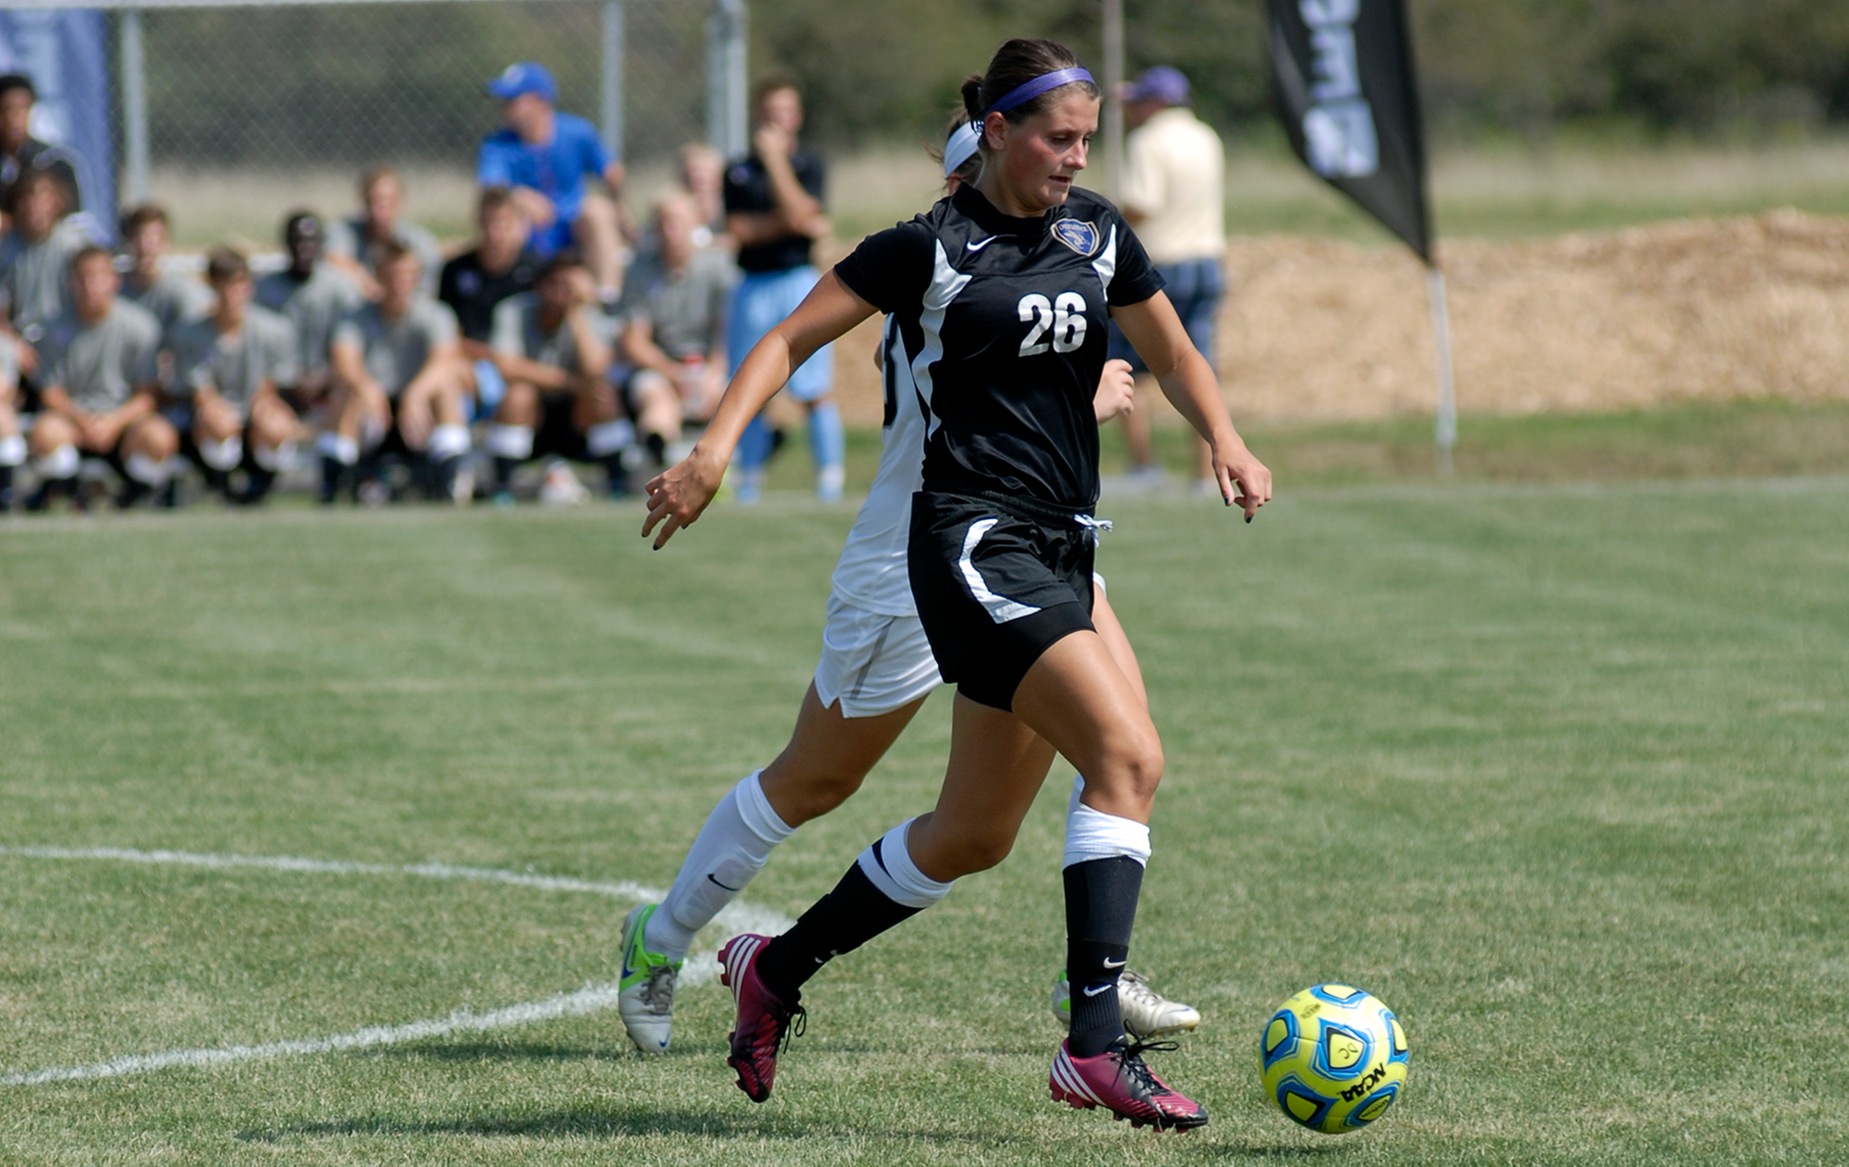 Lady Jackets defeat rival Bluffton, 2-1